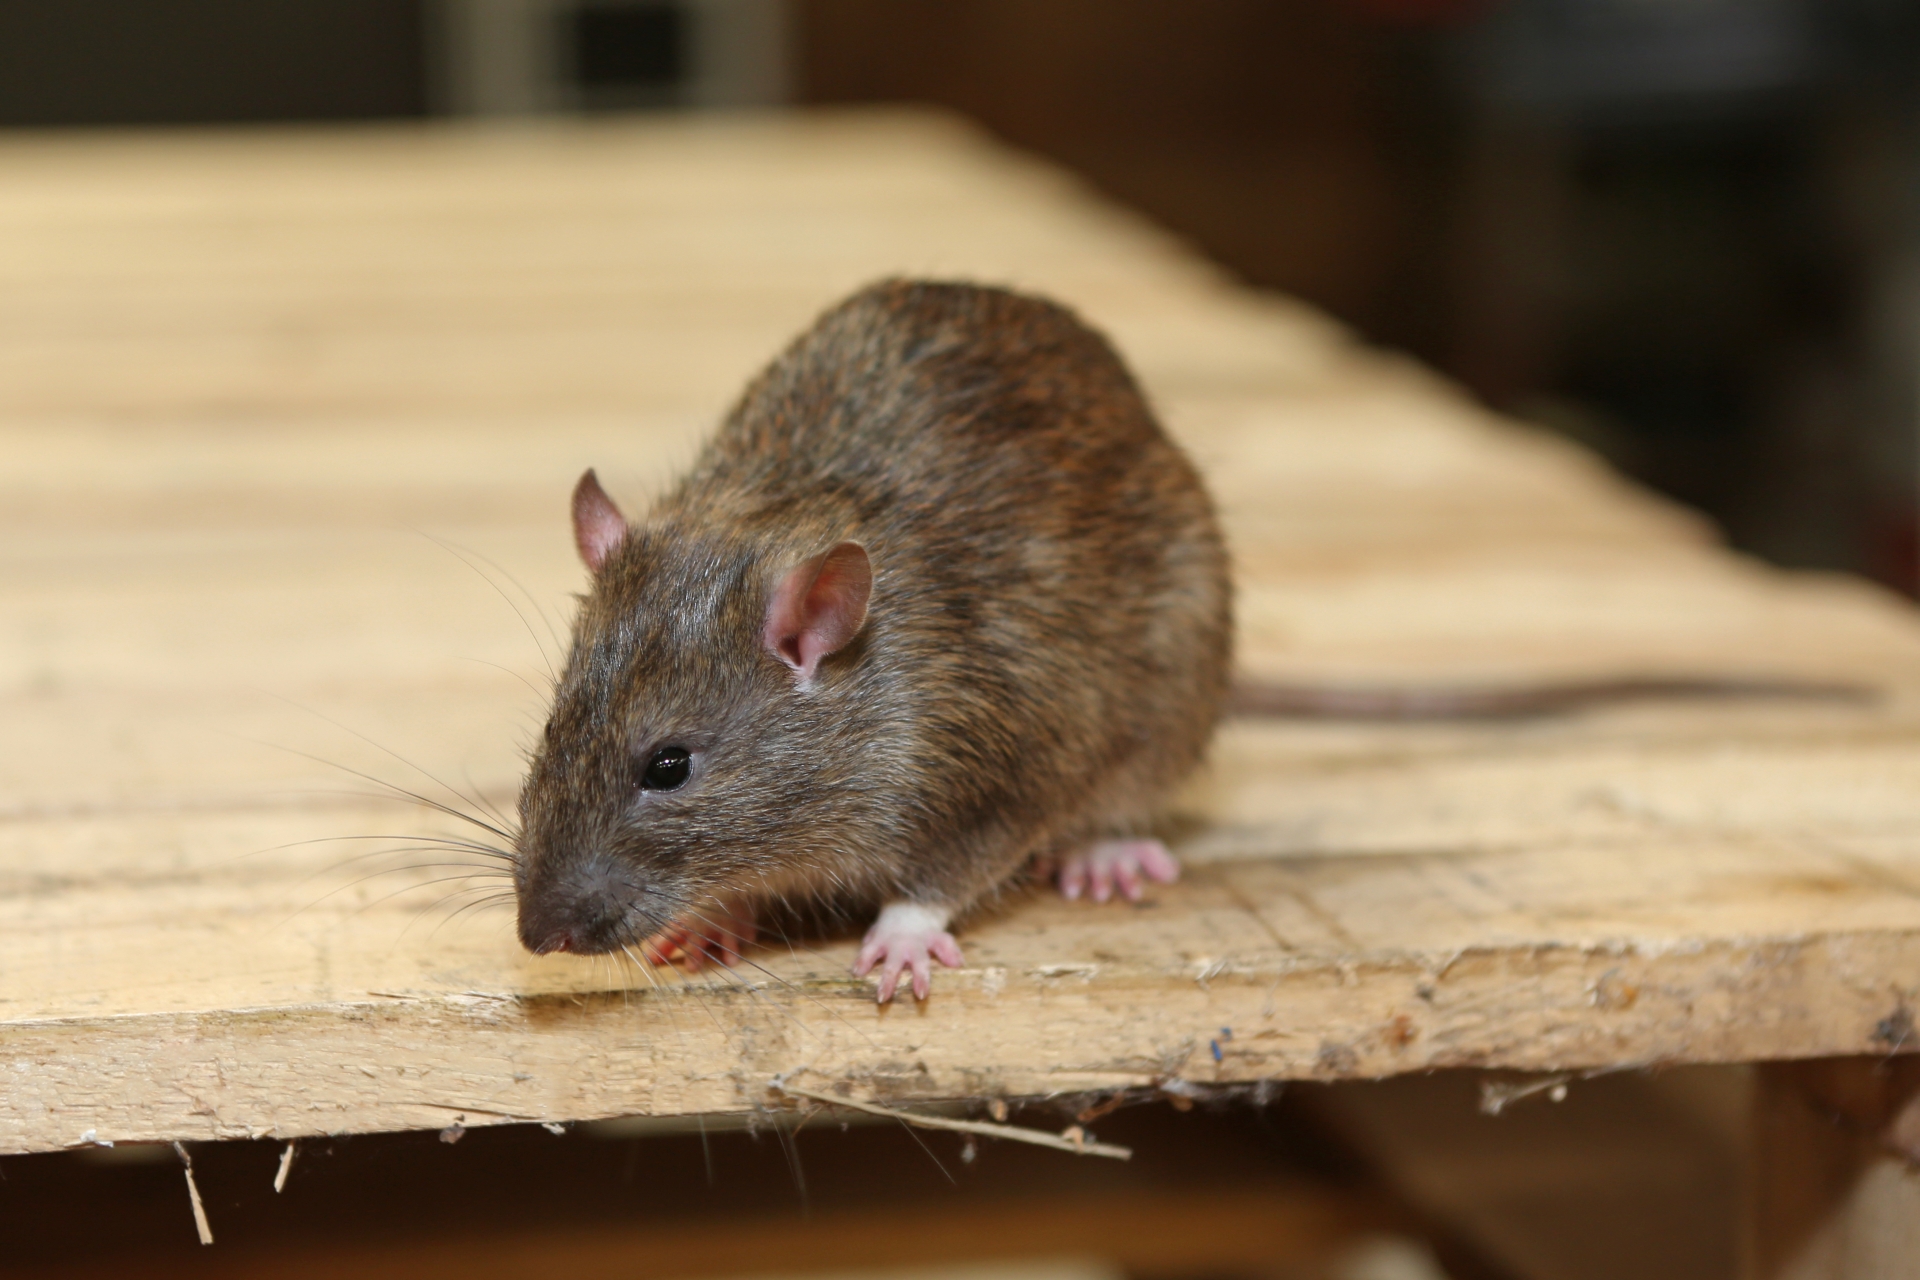 Rat Control, Pest Control in Great Bookham, Little Bookham, KT23. Call Now 020 8166 9746